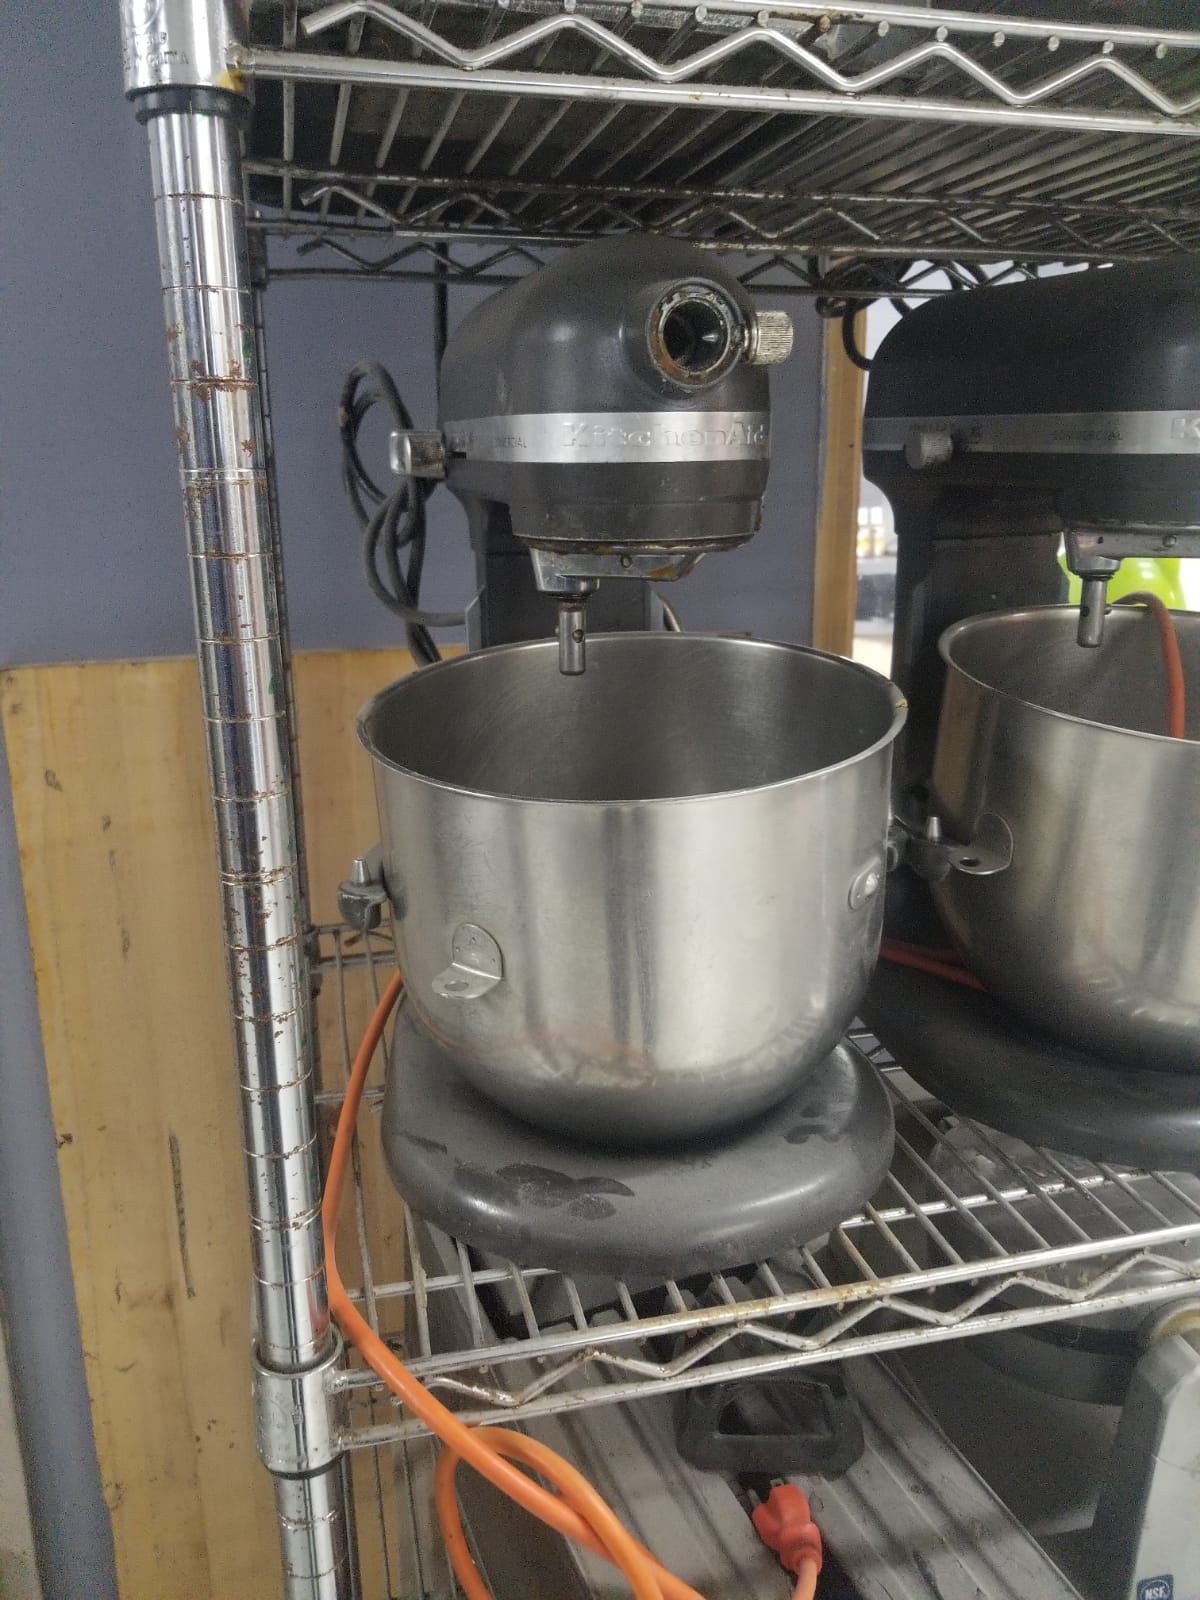 https://www.bakersauthoritys.shop/wp-content/uploads/1692/16/we-offer-kitchenaid-ksm8990dp-8-quart-bowl-lift-mixer-pre-owned-nemox-to-our-customers-who-are-valued-at-a-reasonable-cost-and-with-an-excellent-level-of-service_0.jpg